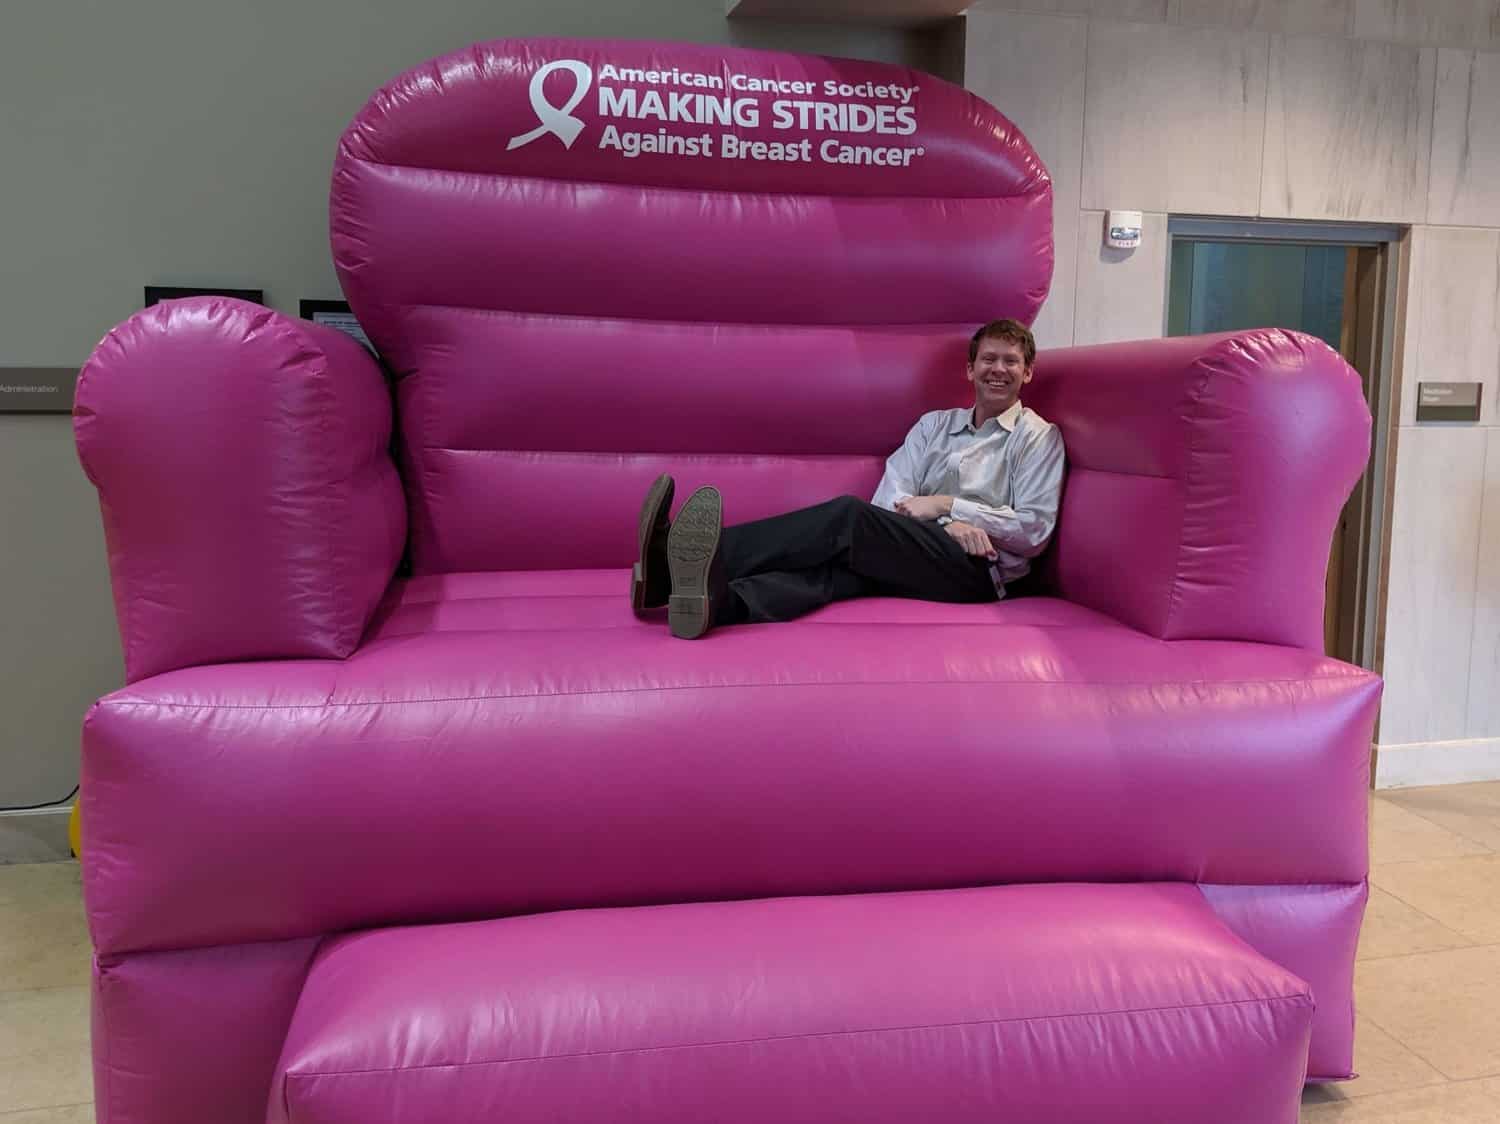 Dr. Mark Storey in a large pink inflatable chair